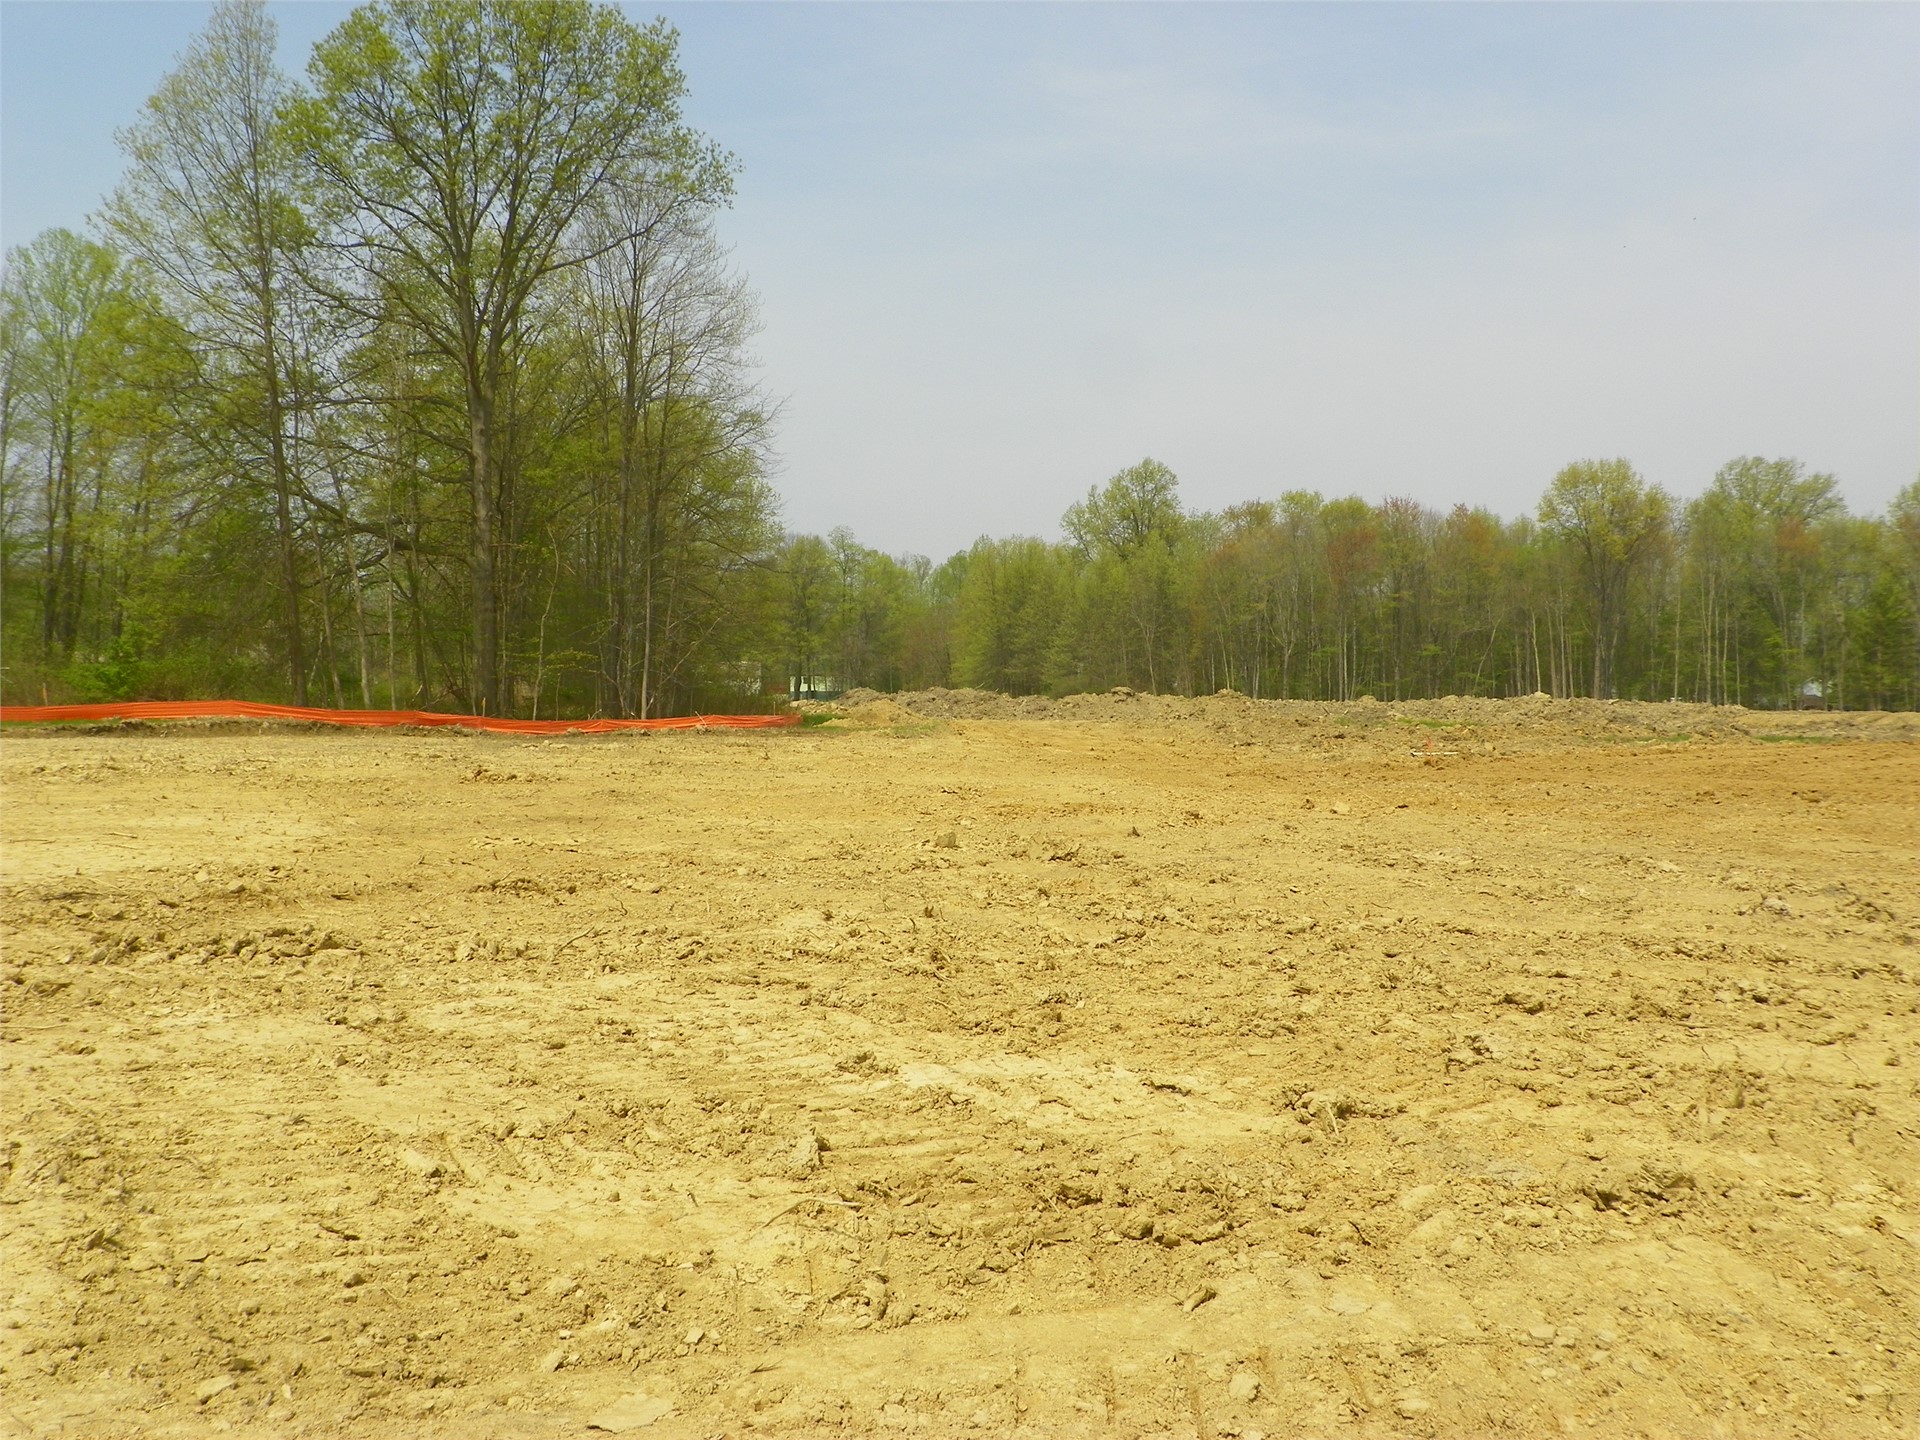 Softball field will be constructed behind trees to left, soccer field in center/right side of photo